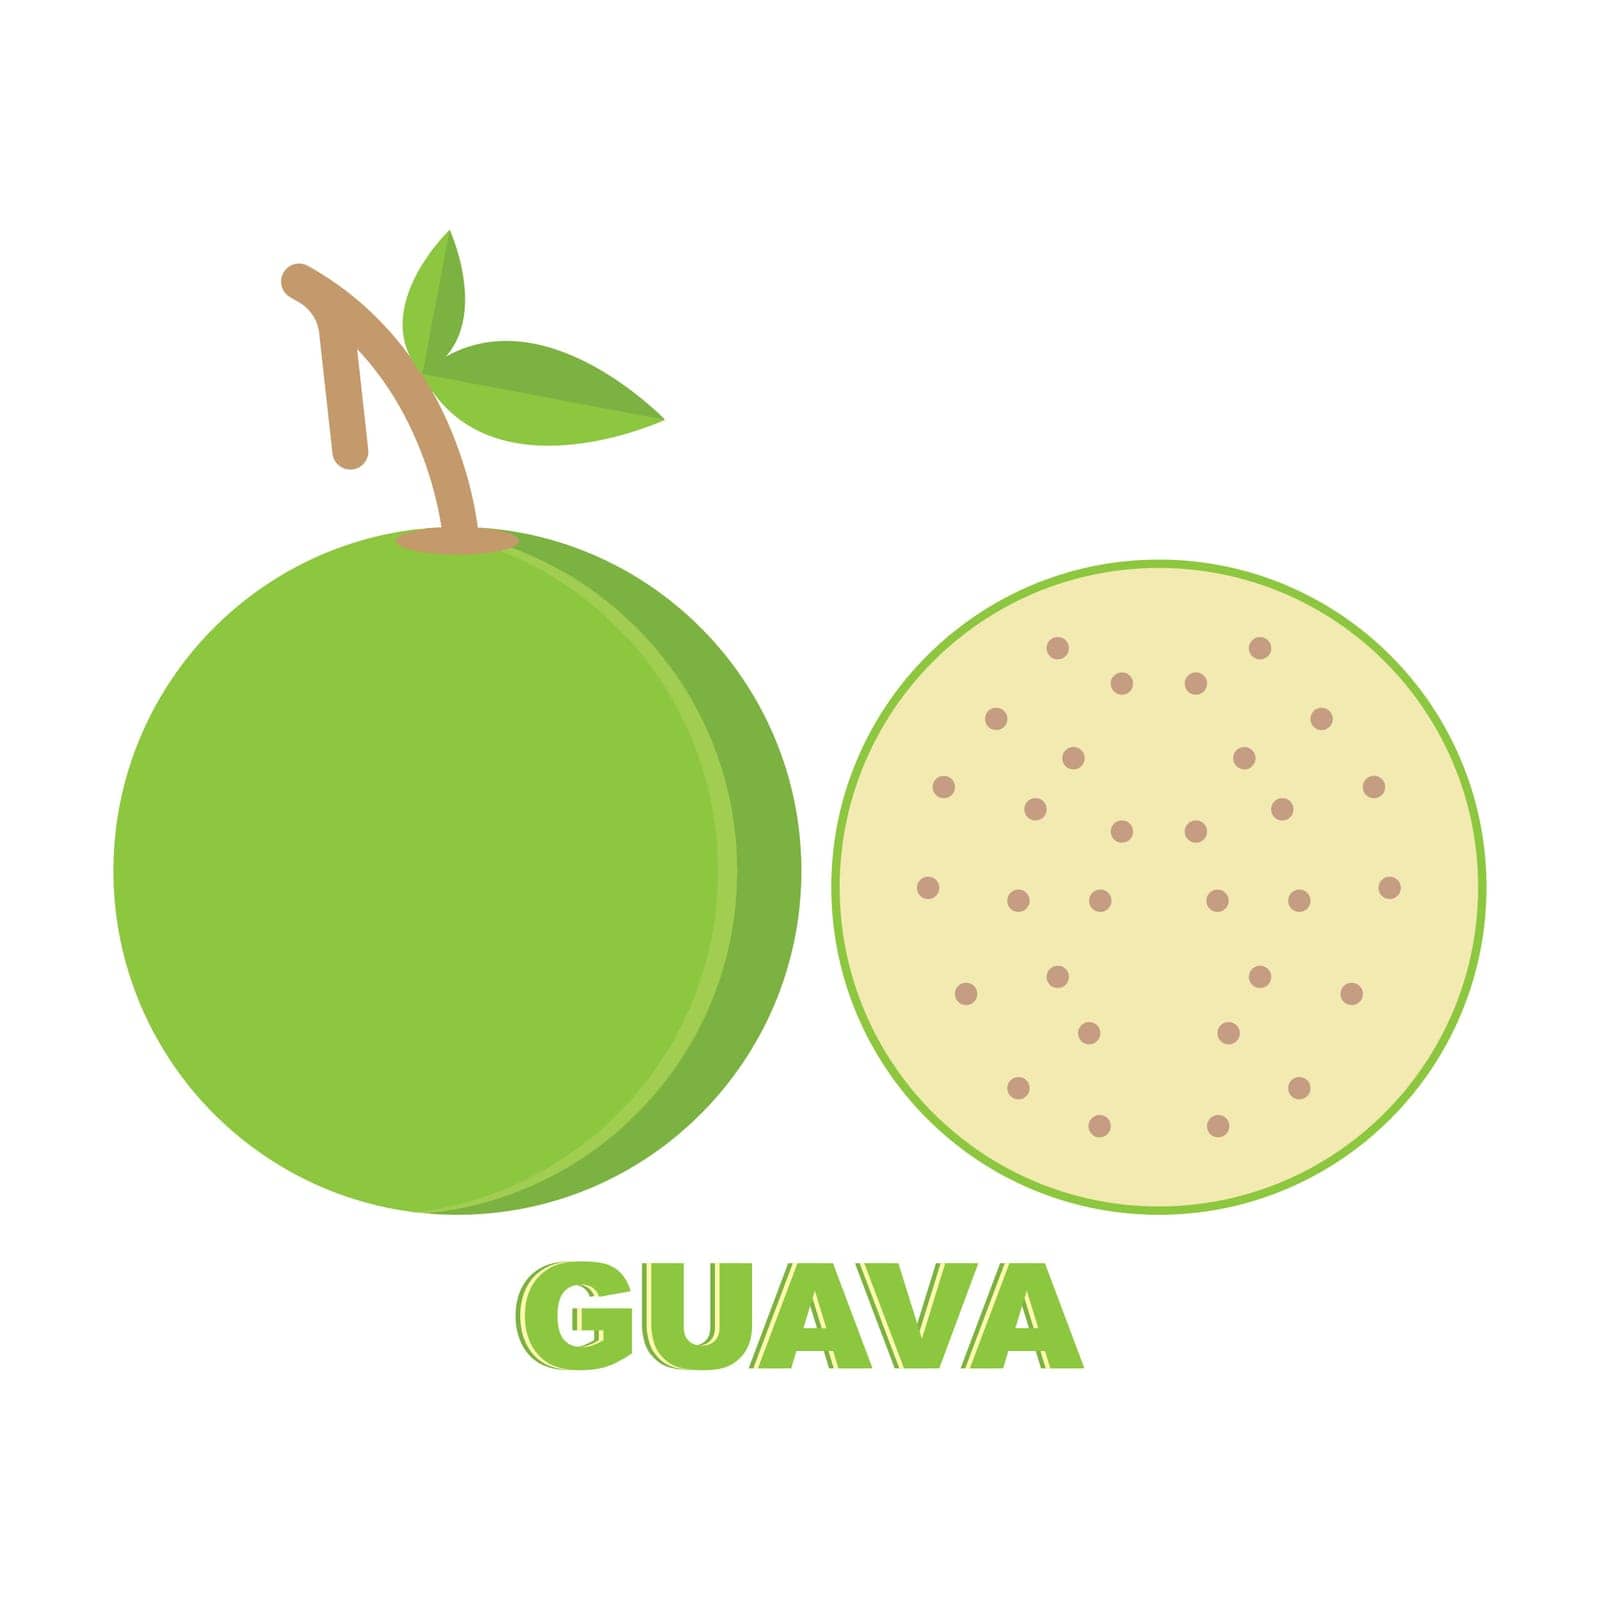 Guava icon design by rnking